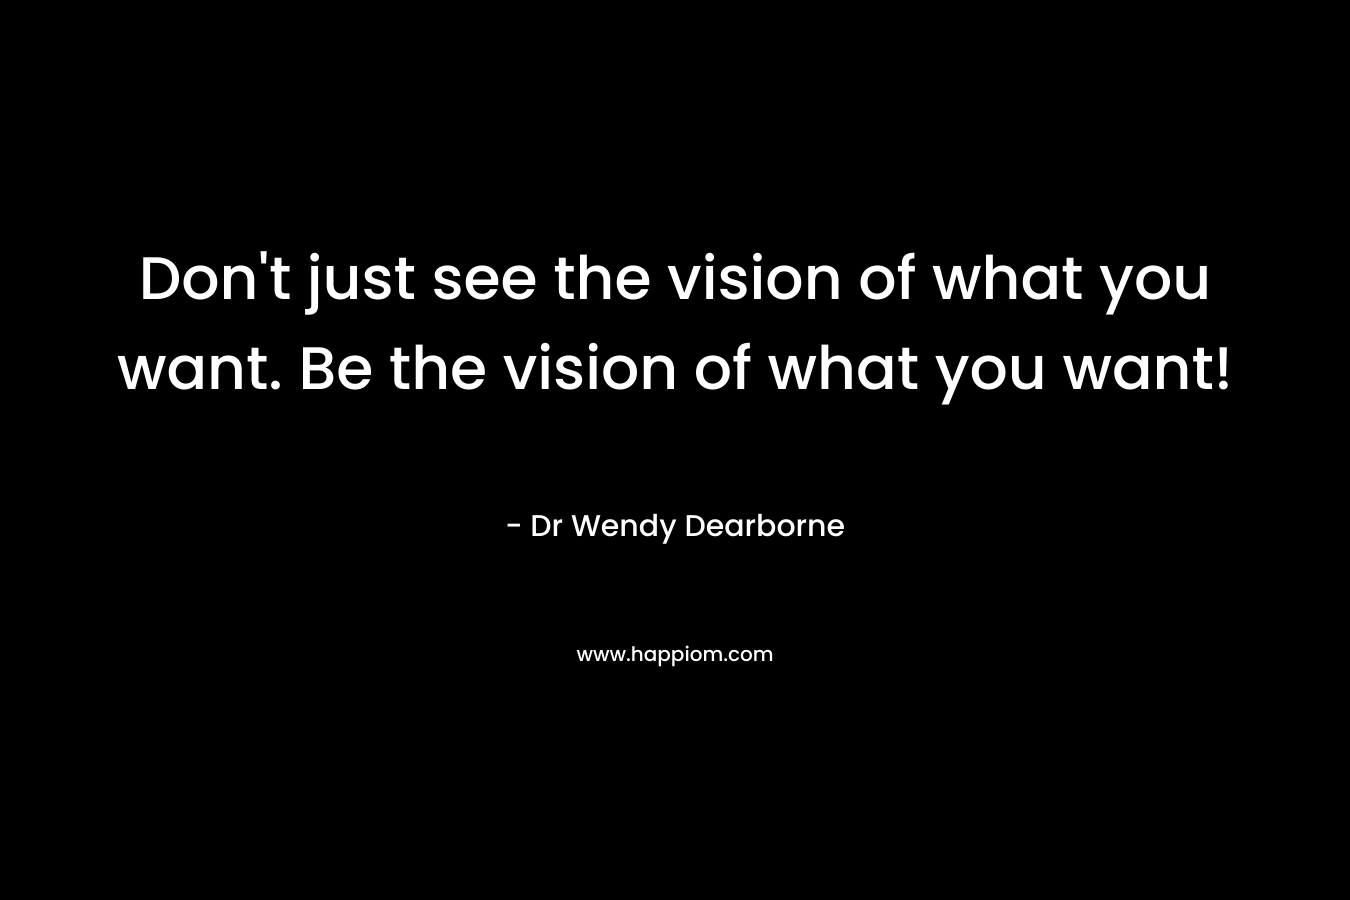 Don't just see the vision of what you want. Be the vision of what you want!